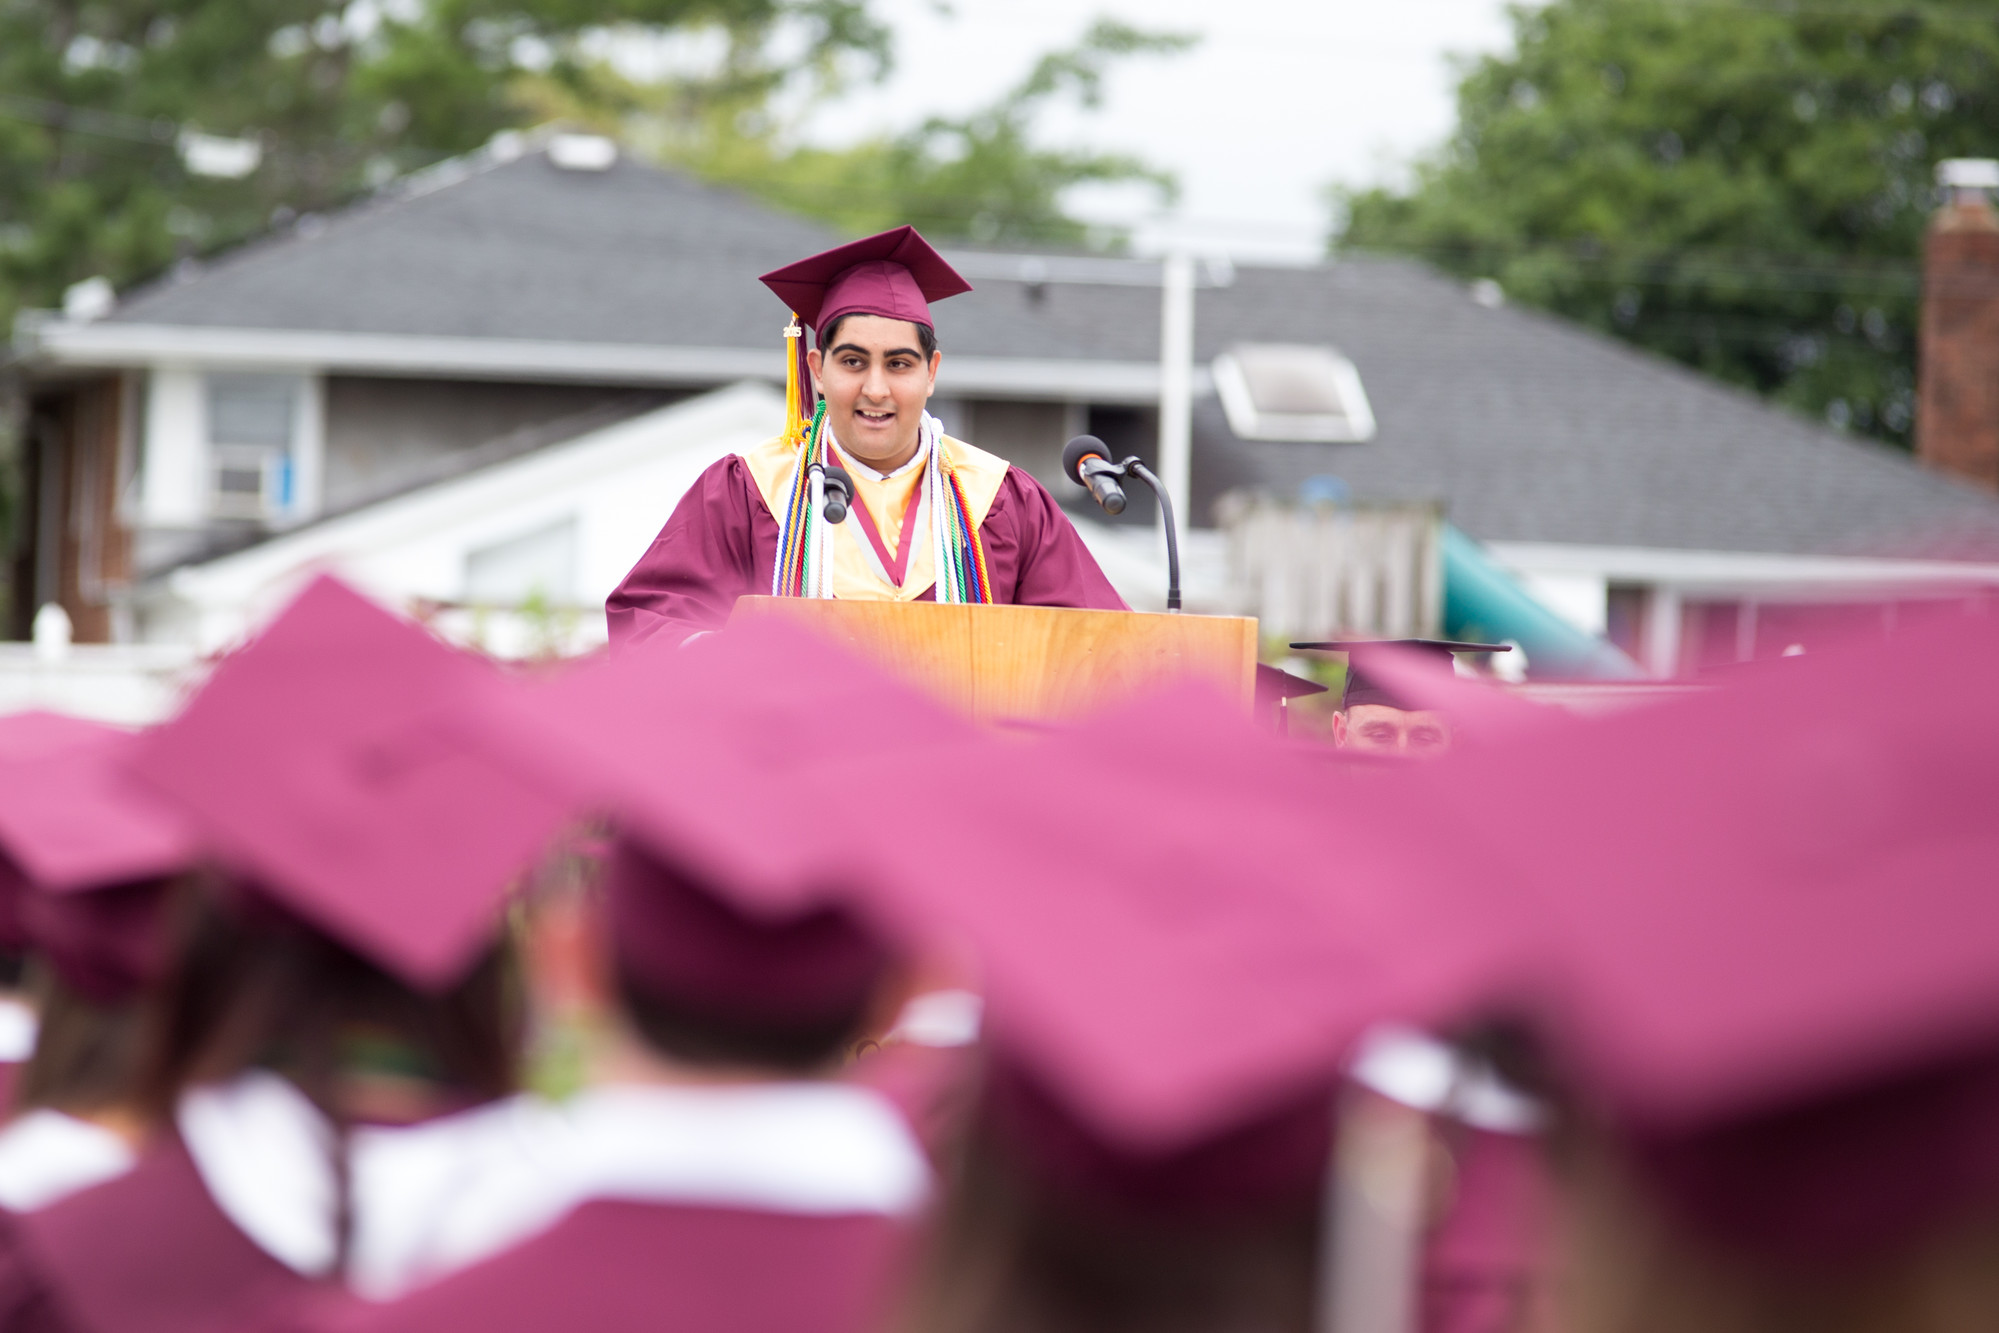 Salutatorian Rohit Bachani urged his peers to “hold on to your sense of courage and willpower.”